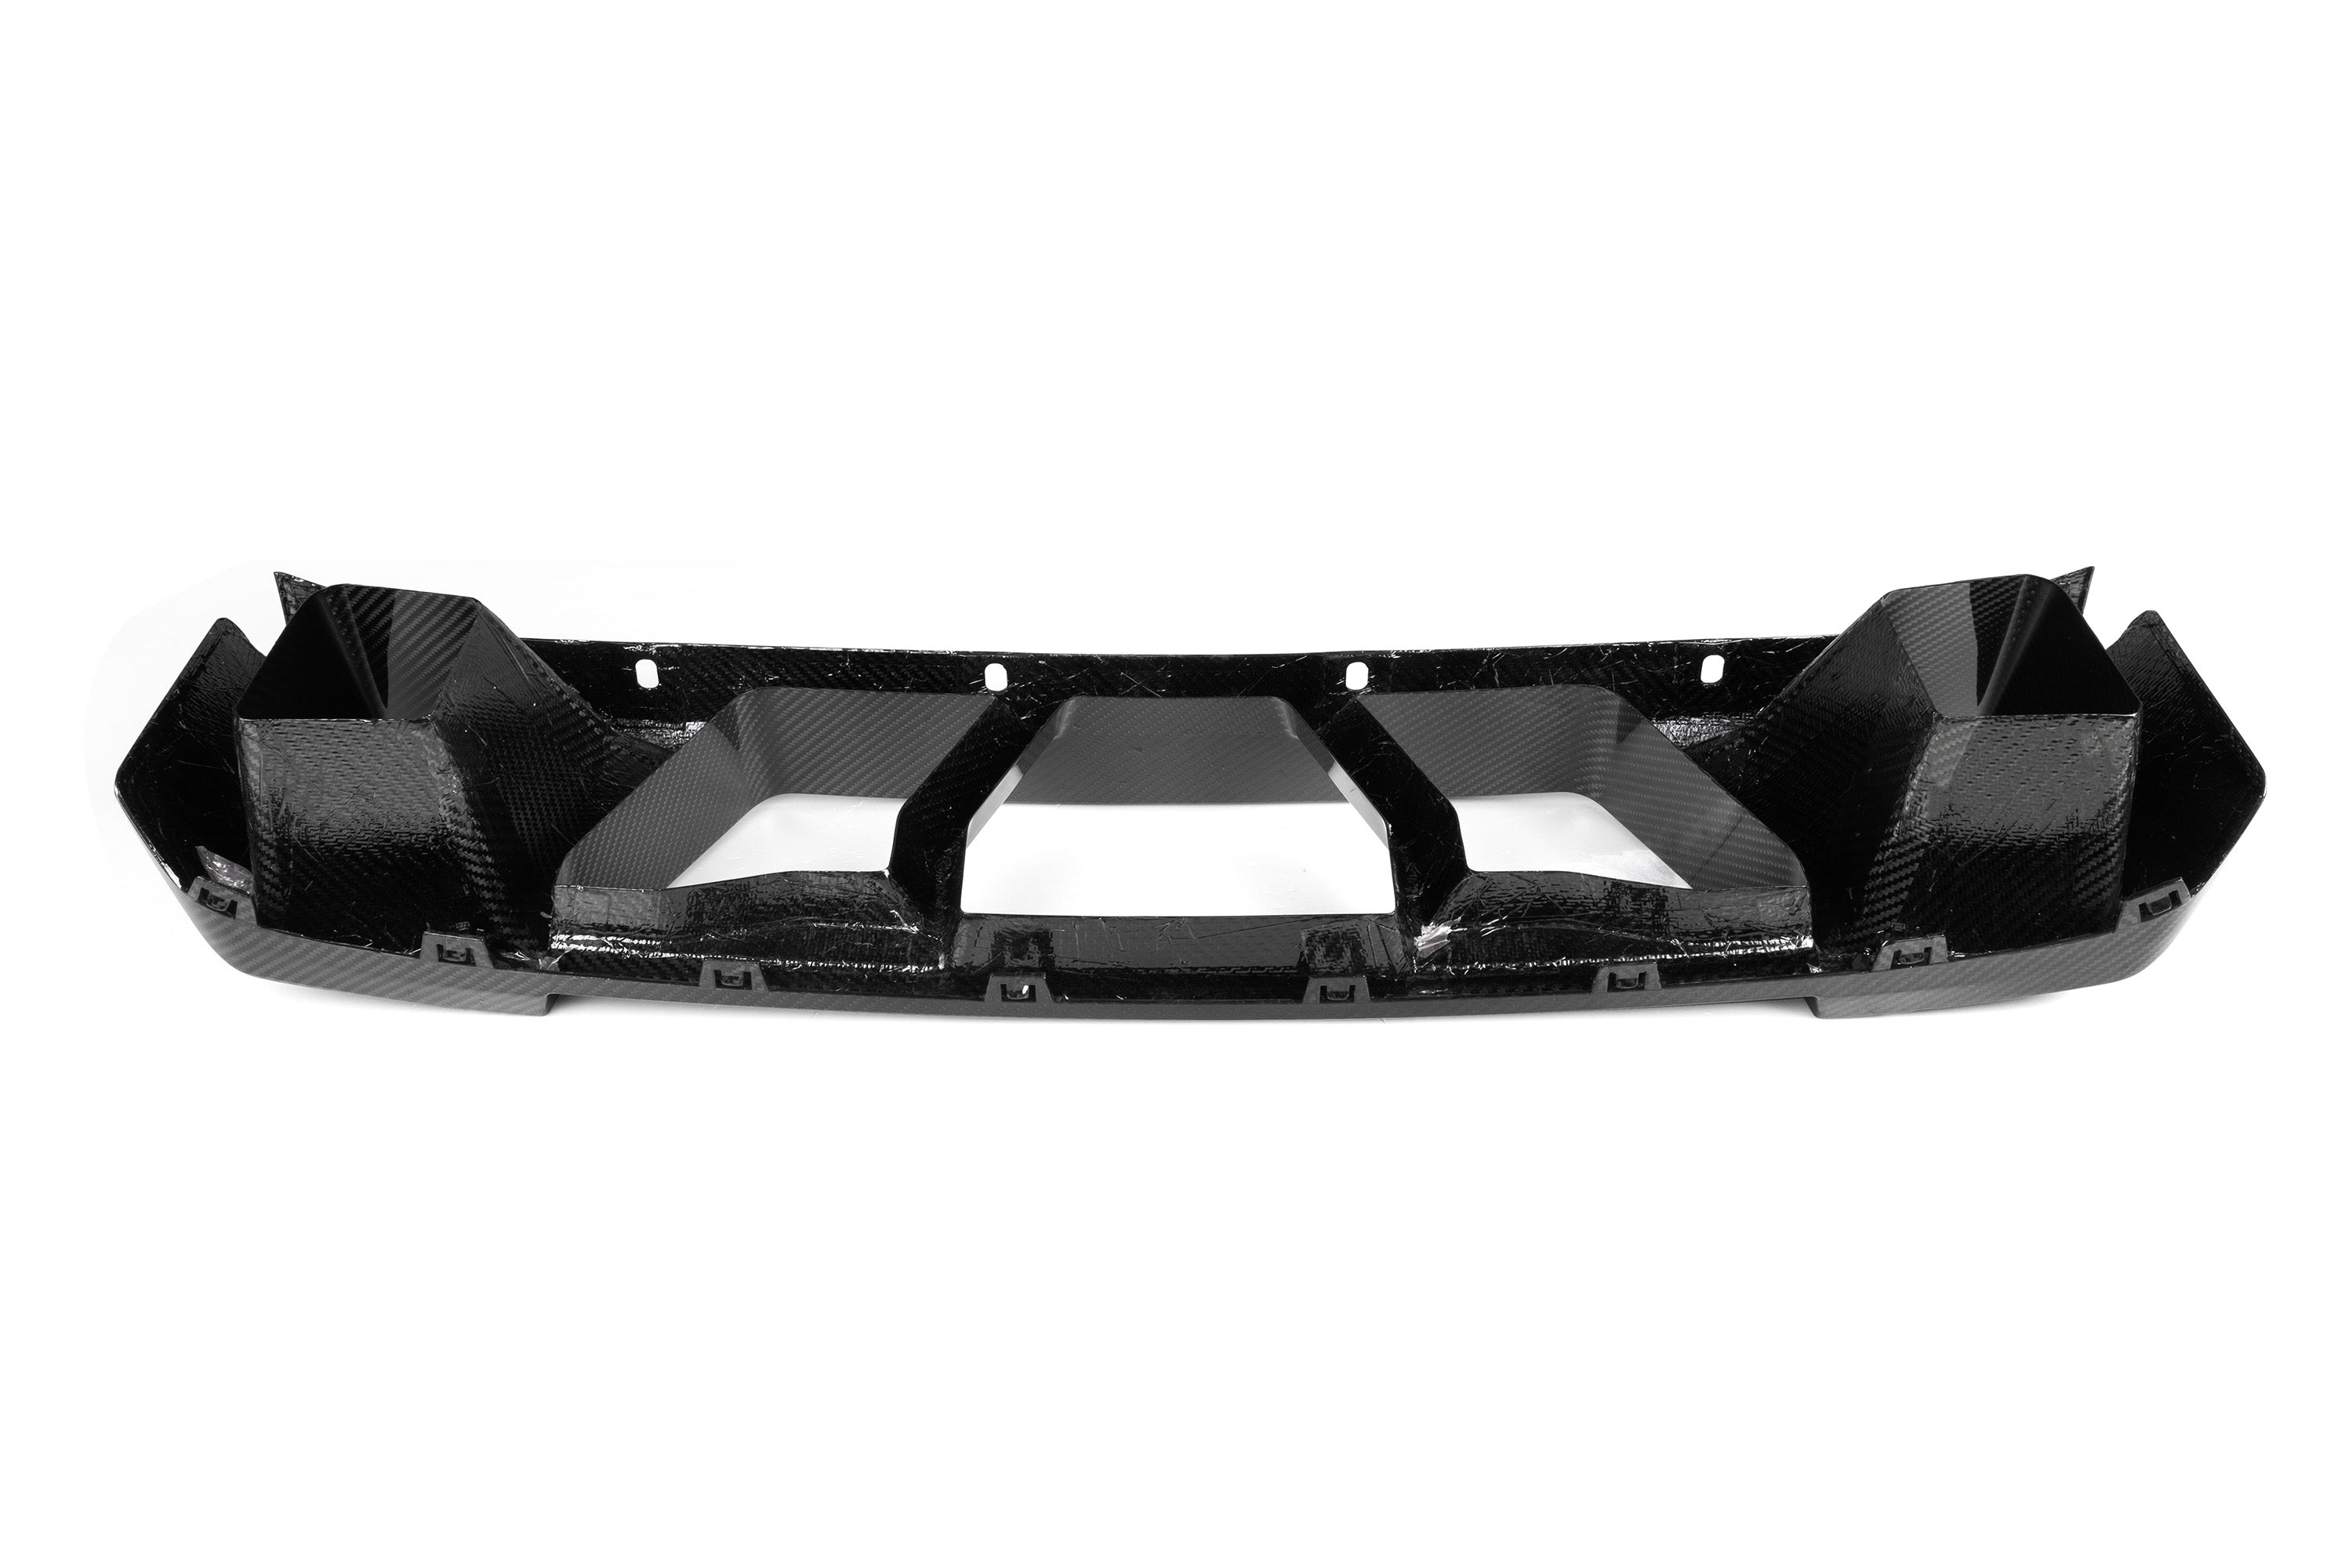 Middle bumper cover made of PrePreg carbon for BMW M2 G87 